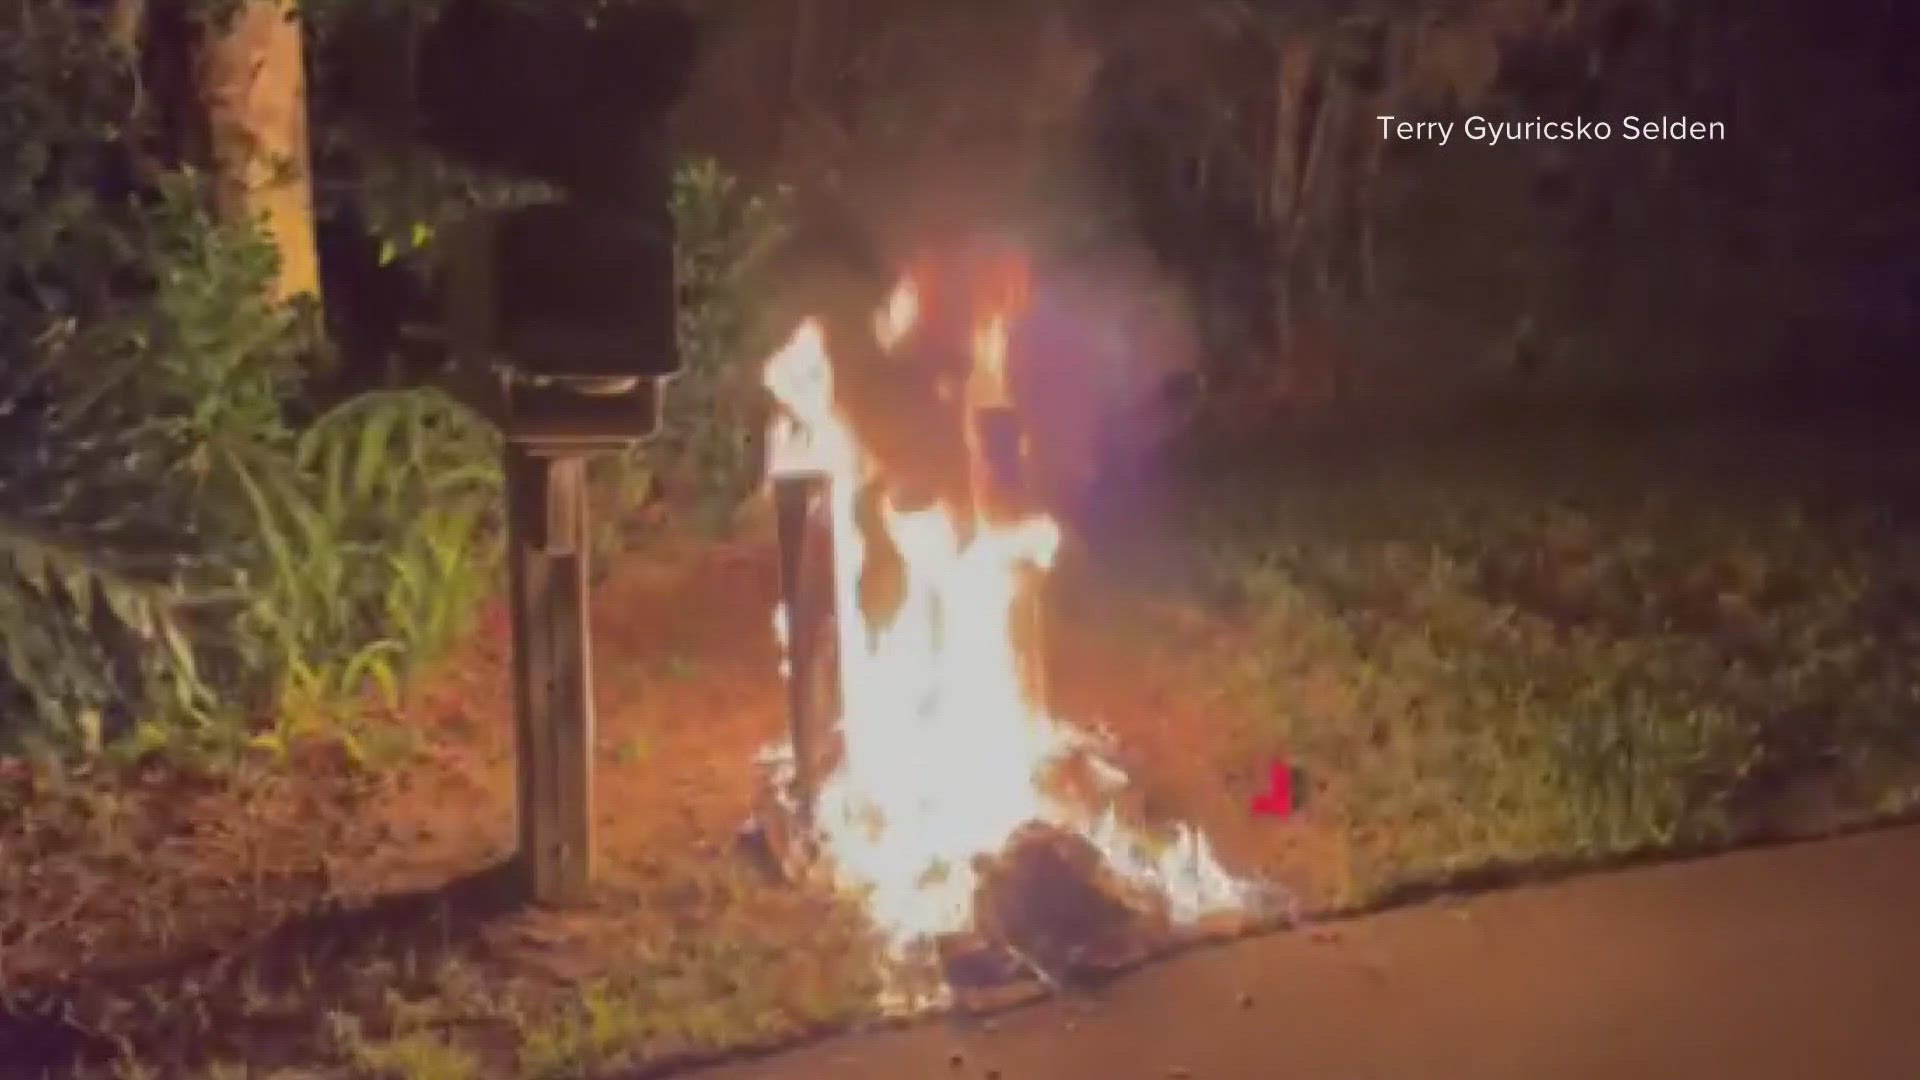 Neptune Beach Police are searching for a vehicle of interest and a man wanted for destroying mailboxes, setting them and other objects on fire on Nightfall Drive.